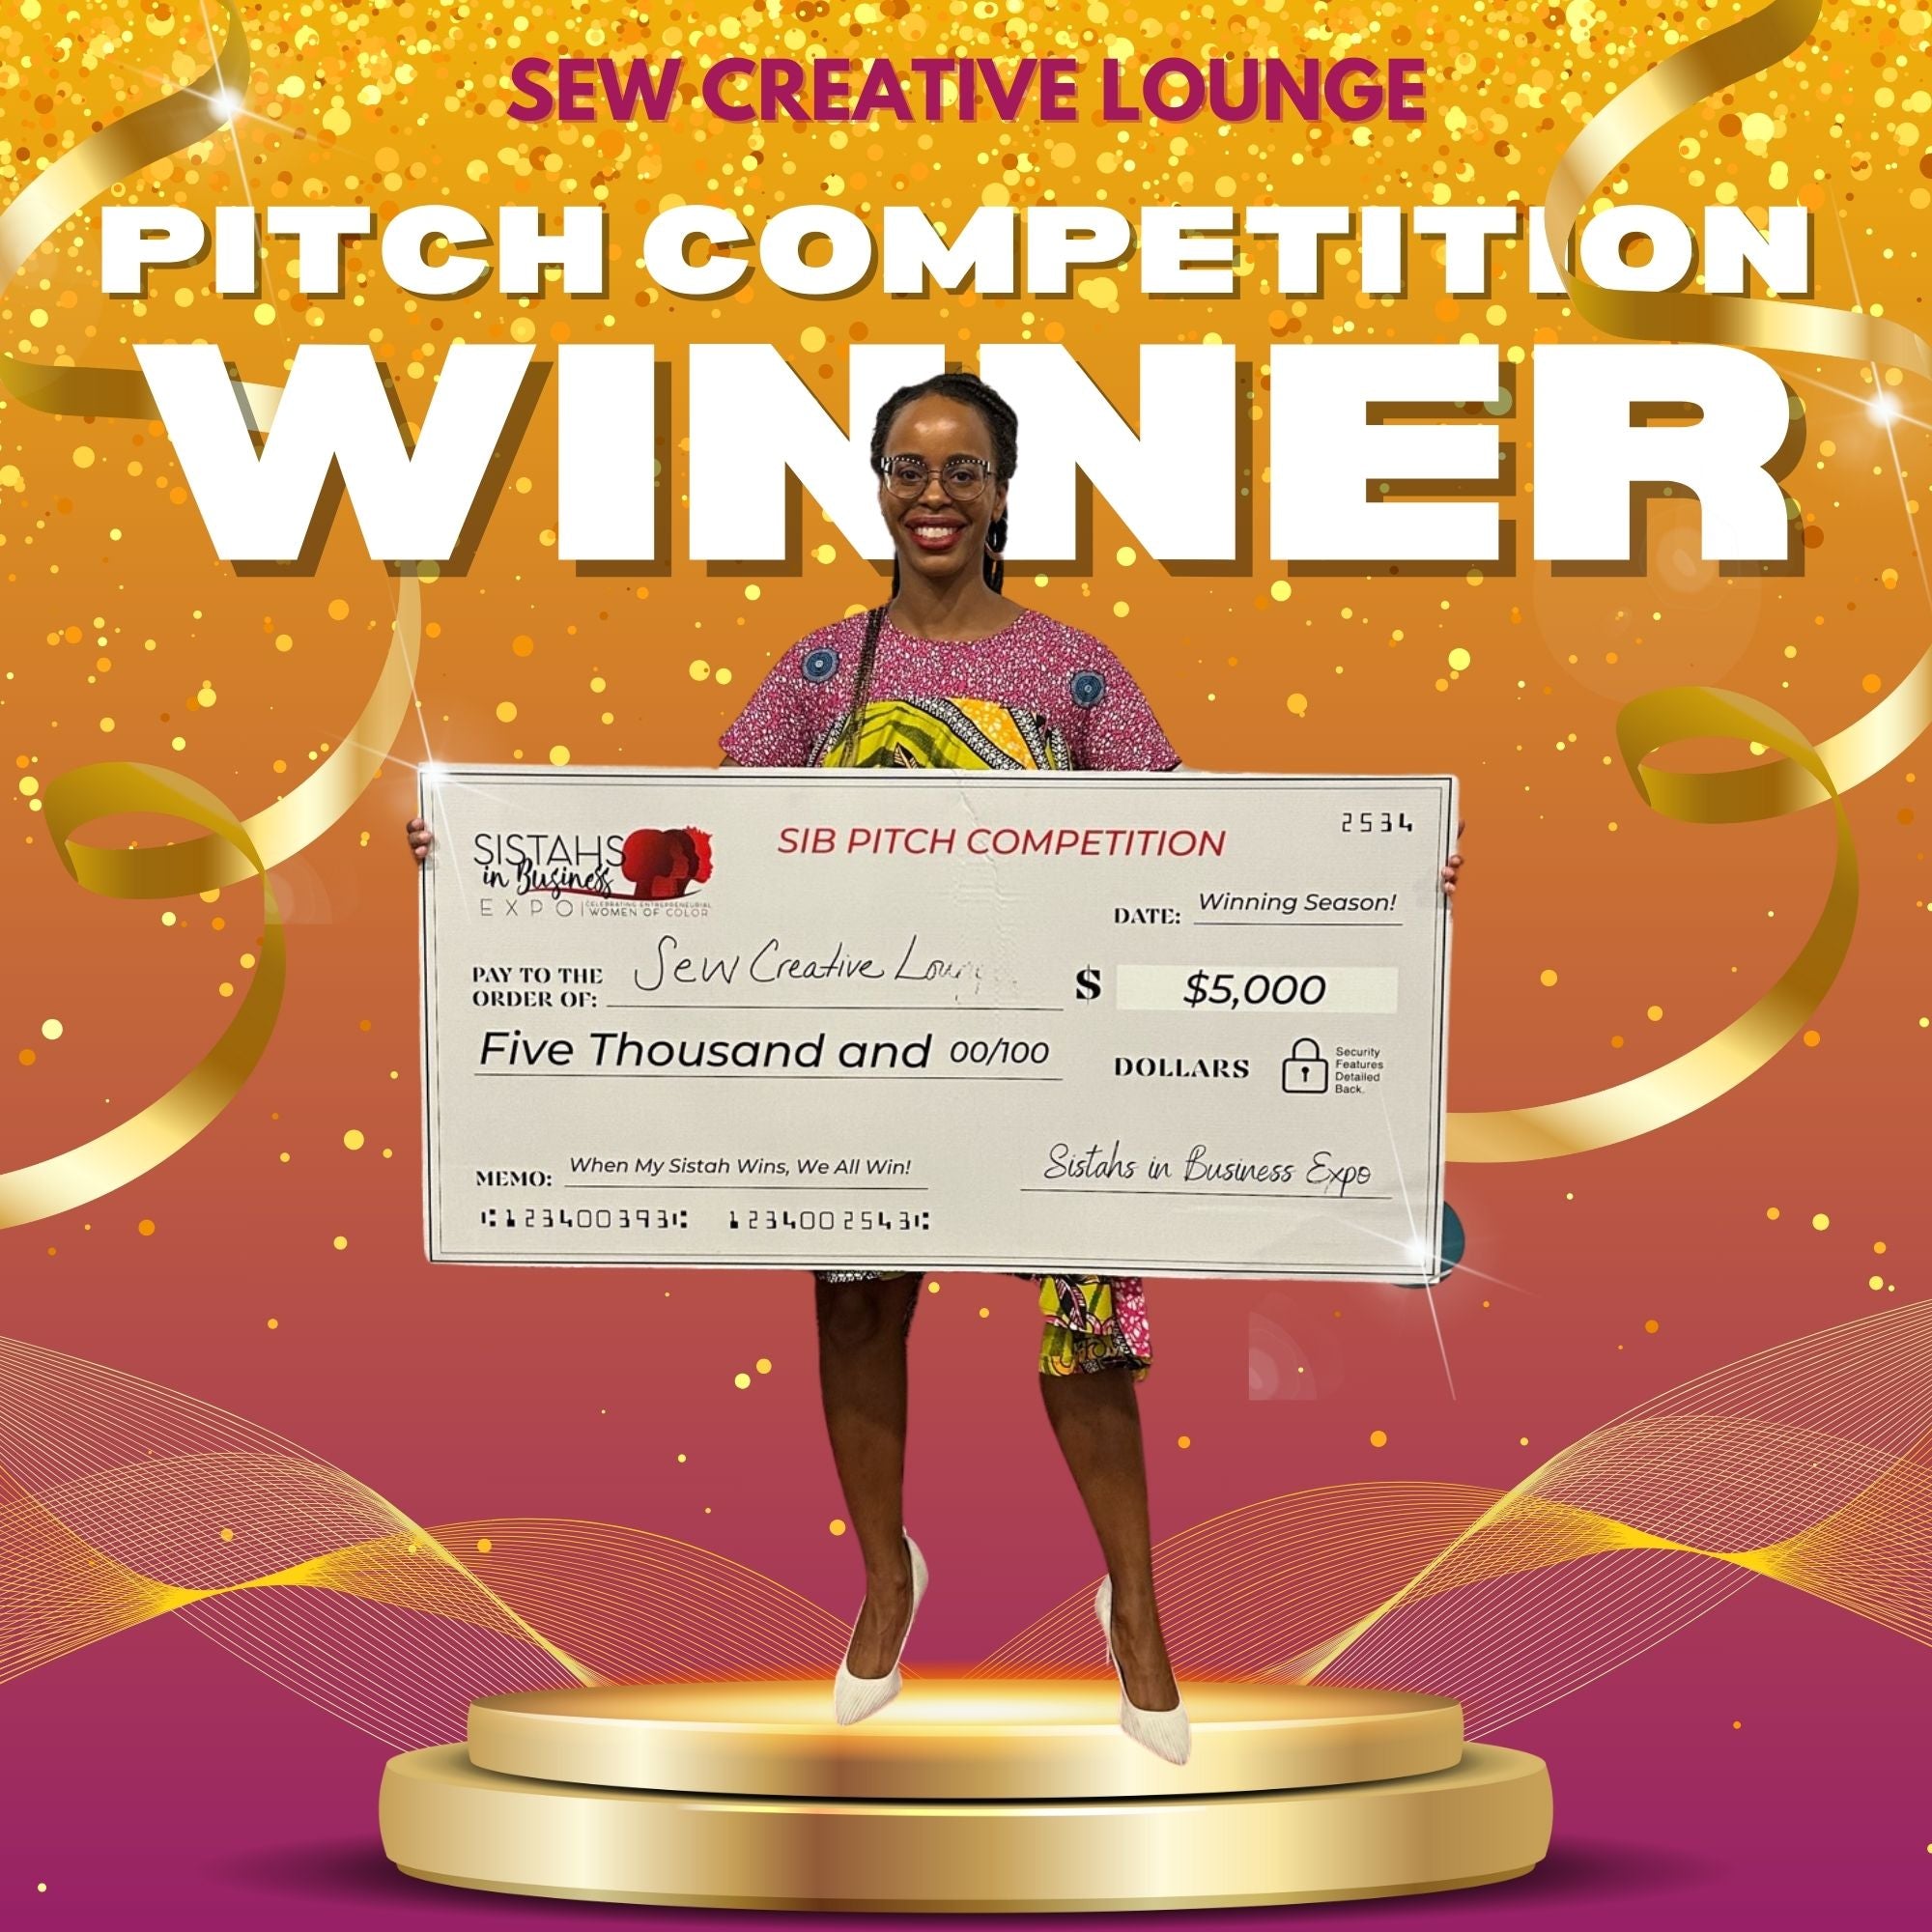 Cecily Habimana Wins $5,000 at the SIB Pitch Competition: A Victory for Sew Creative Lounge